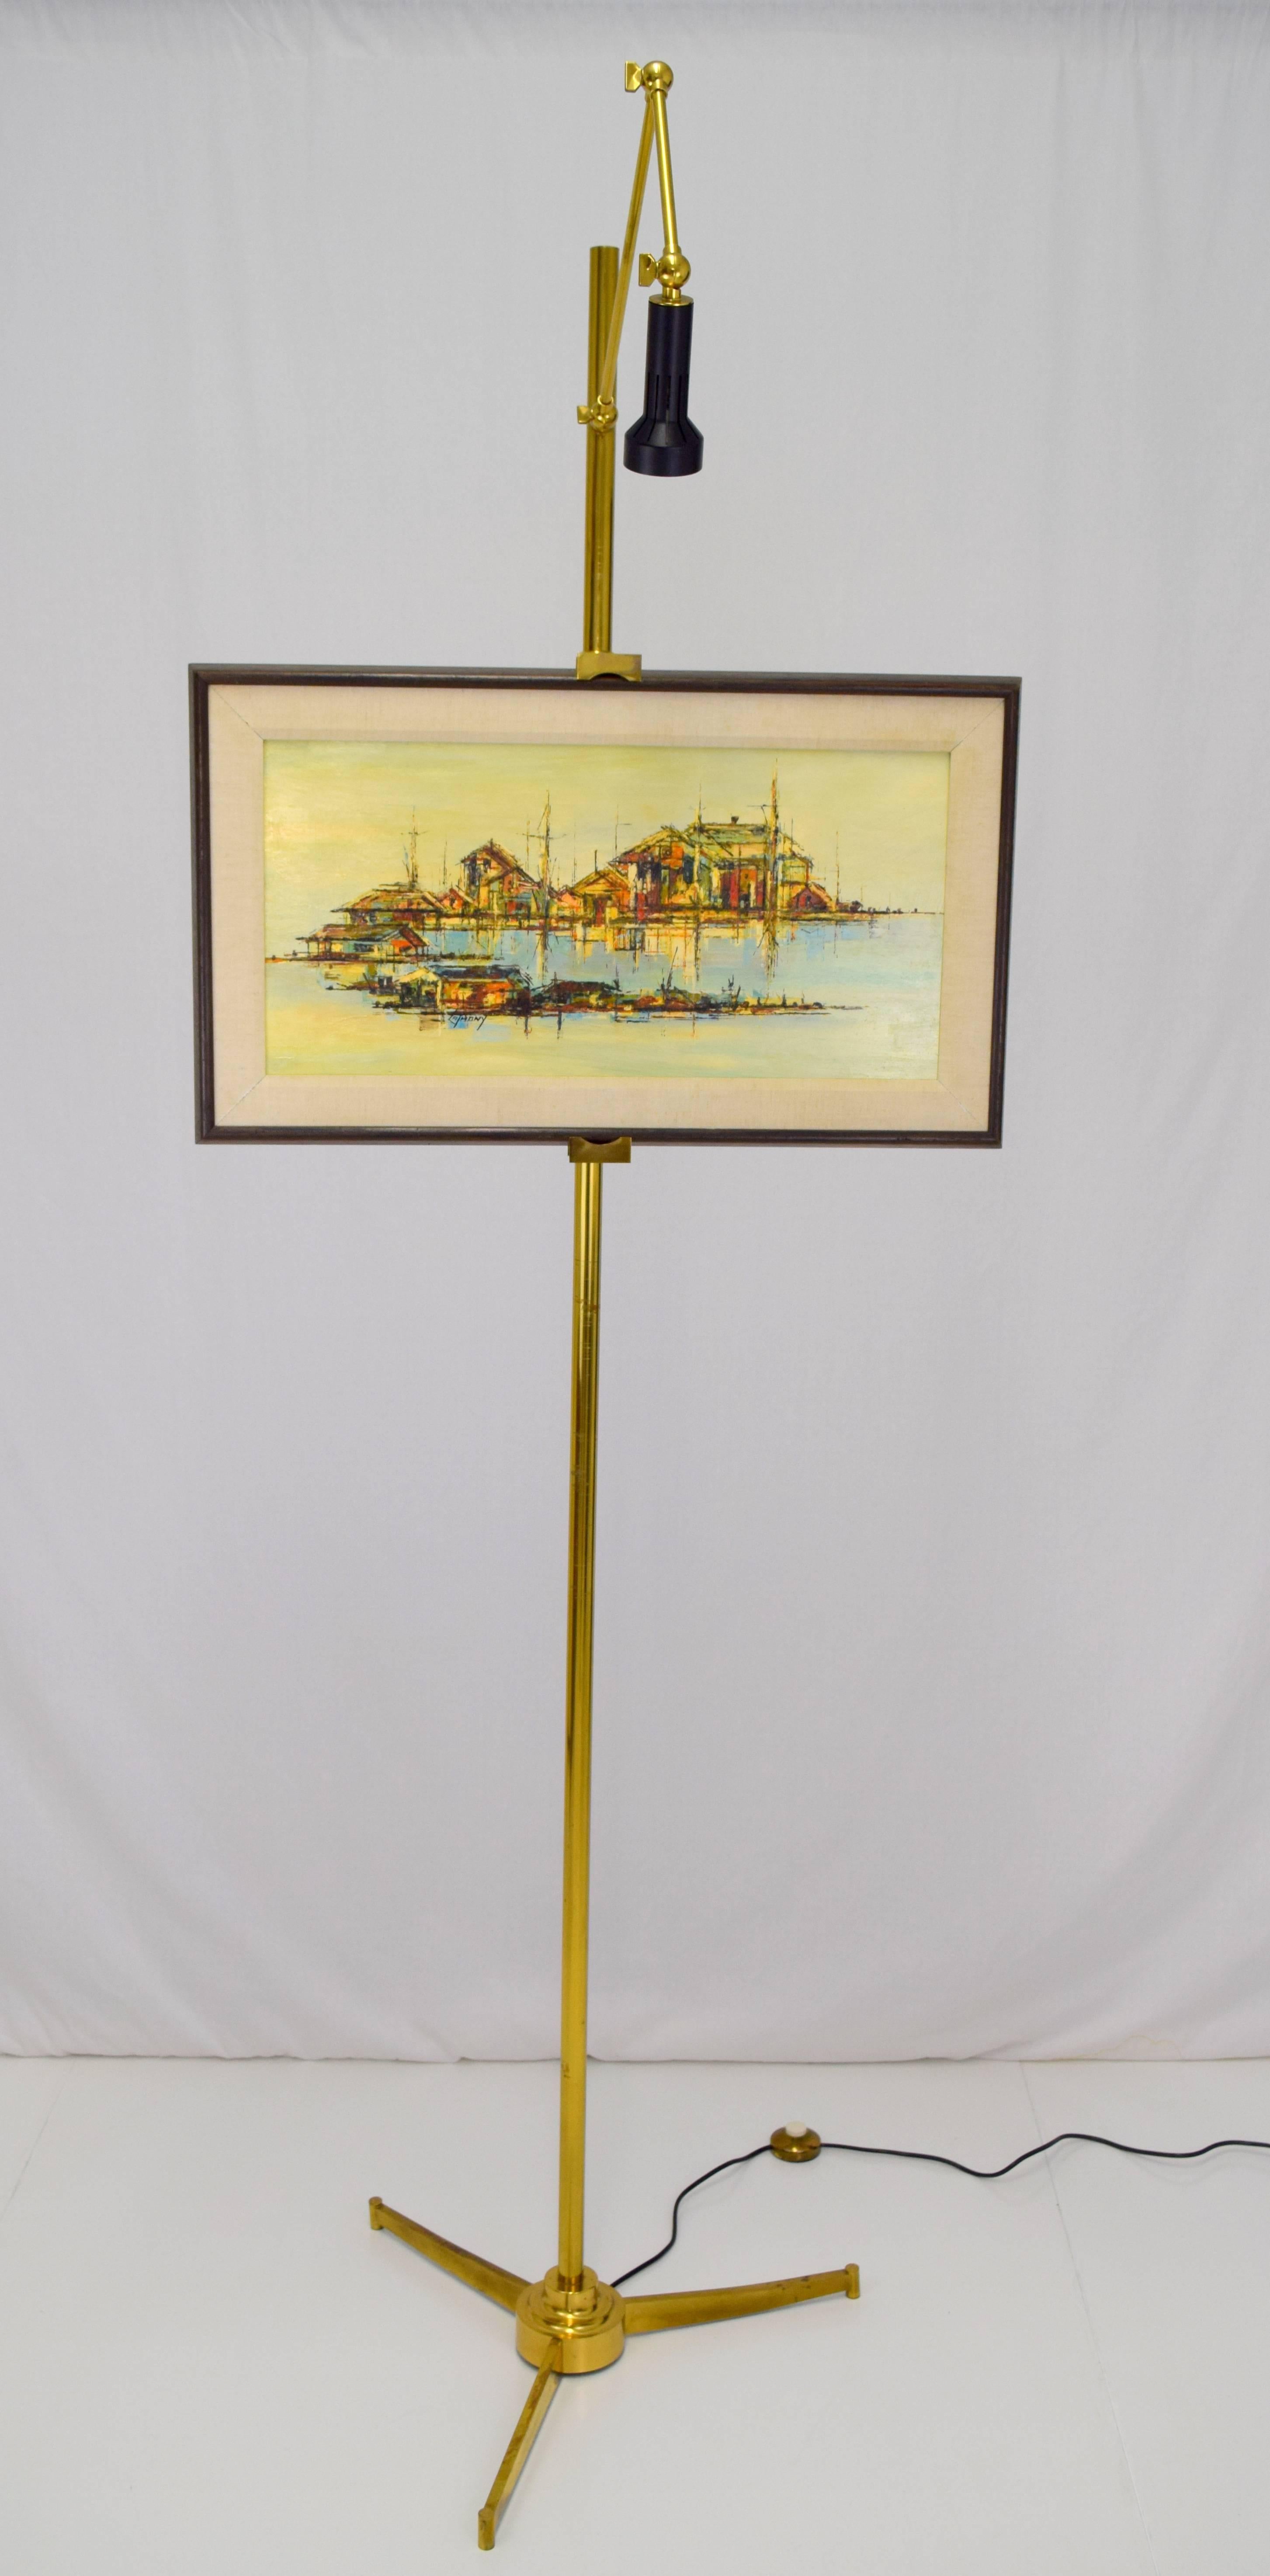 Amazing Italian easel floor lamp in brass and painted metal shade. Adjustable arms allow for various sized artworks, light source arms adjustable with excellently crafted fittings and hardware. Made in Italy stamped on underside of stepped tripod